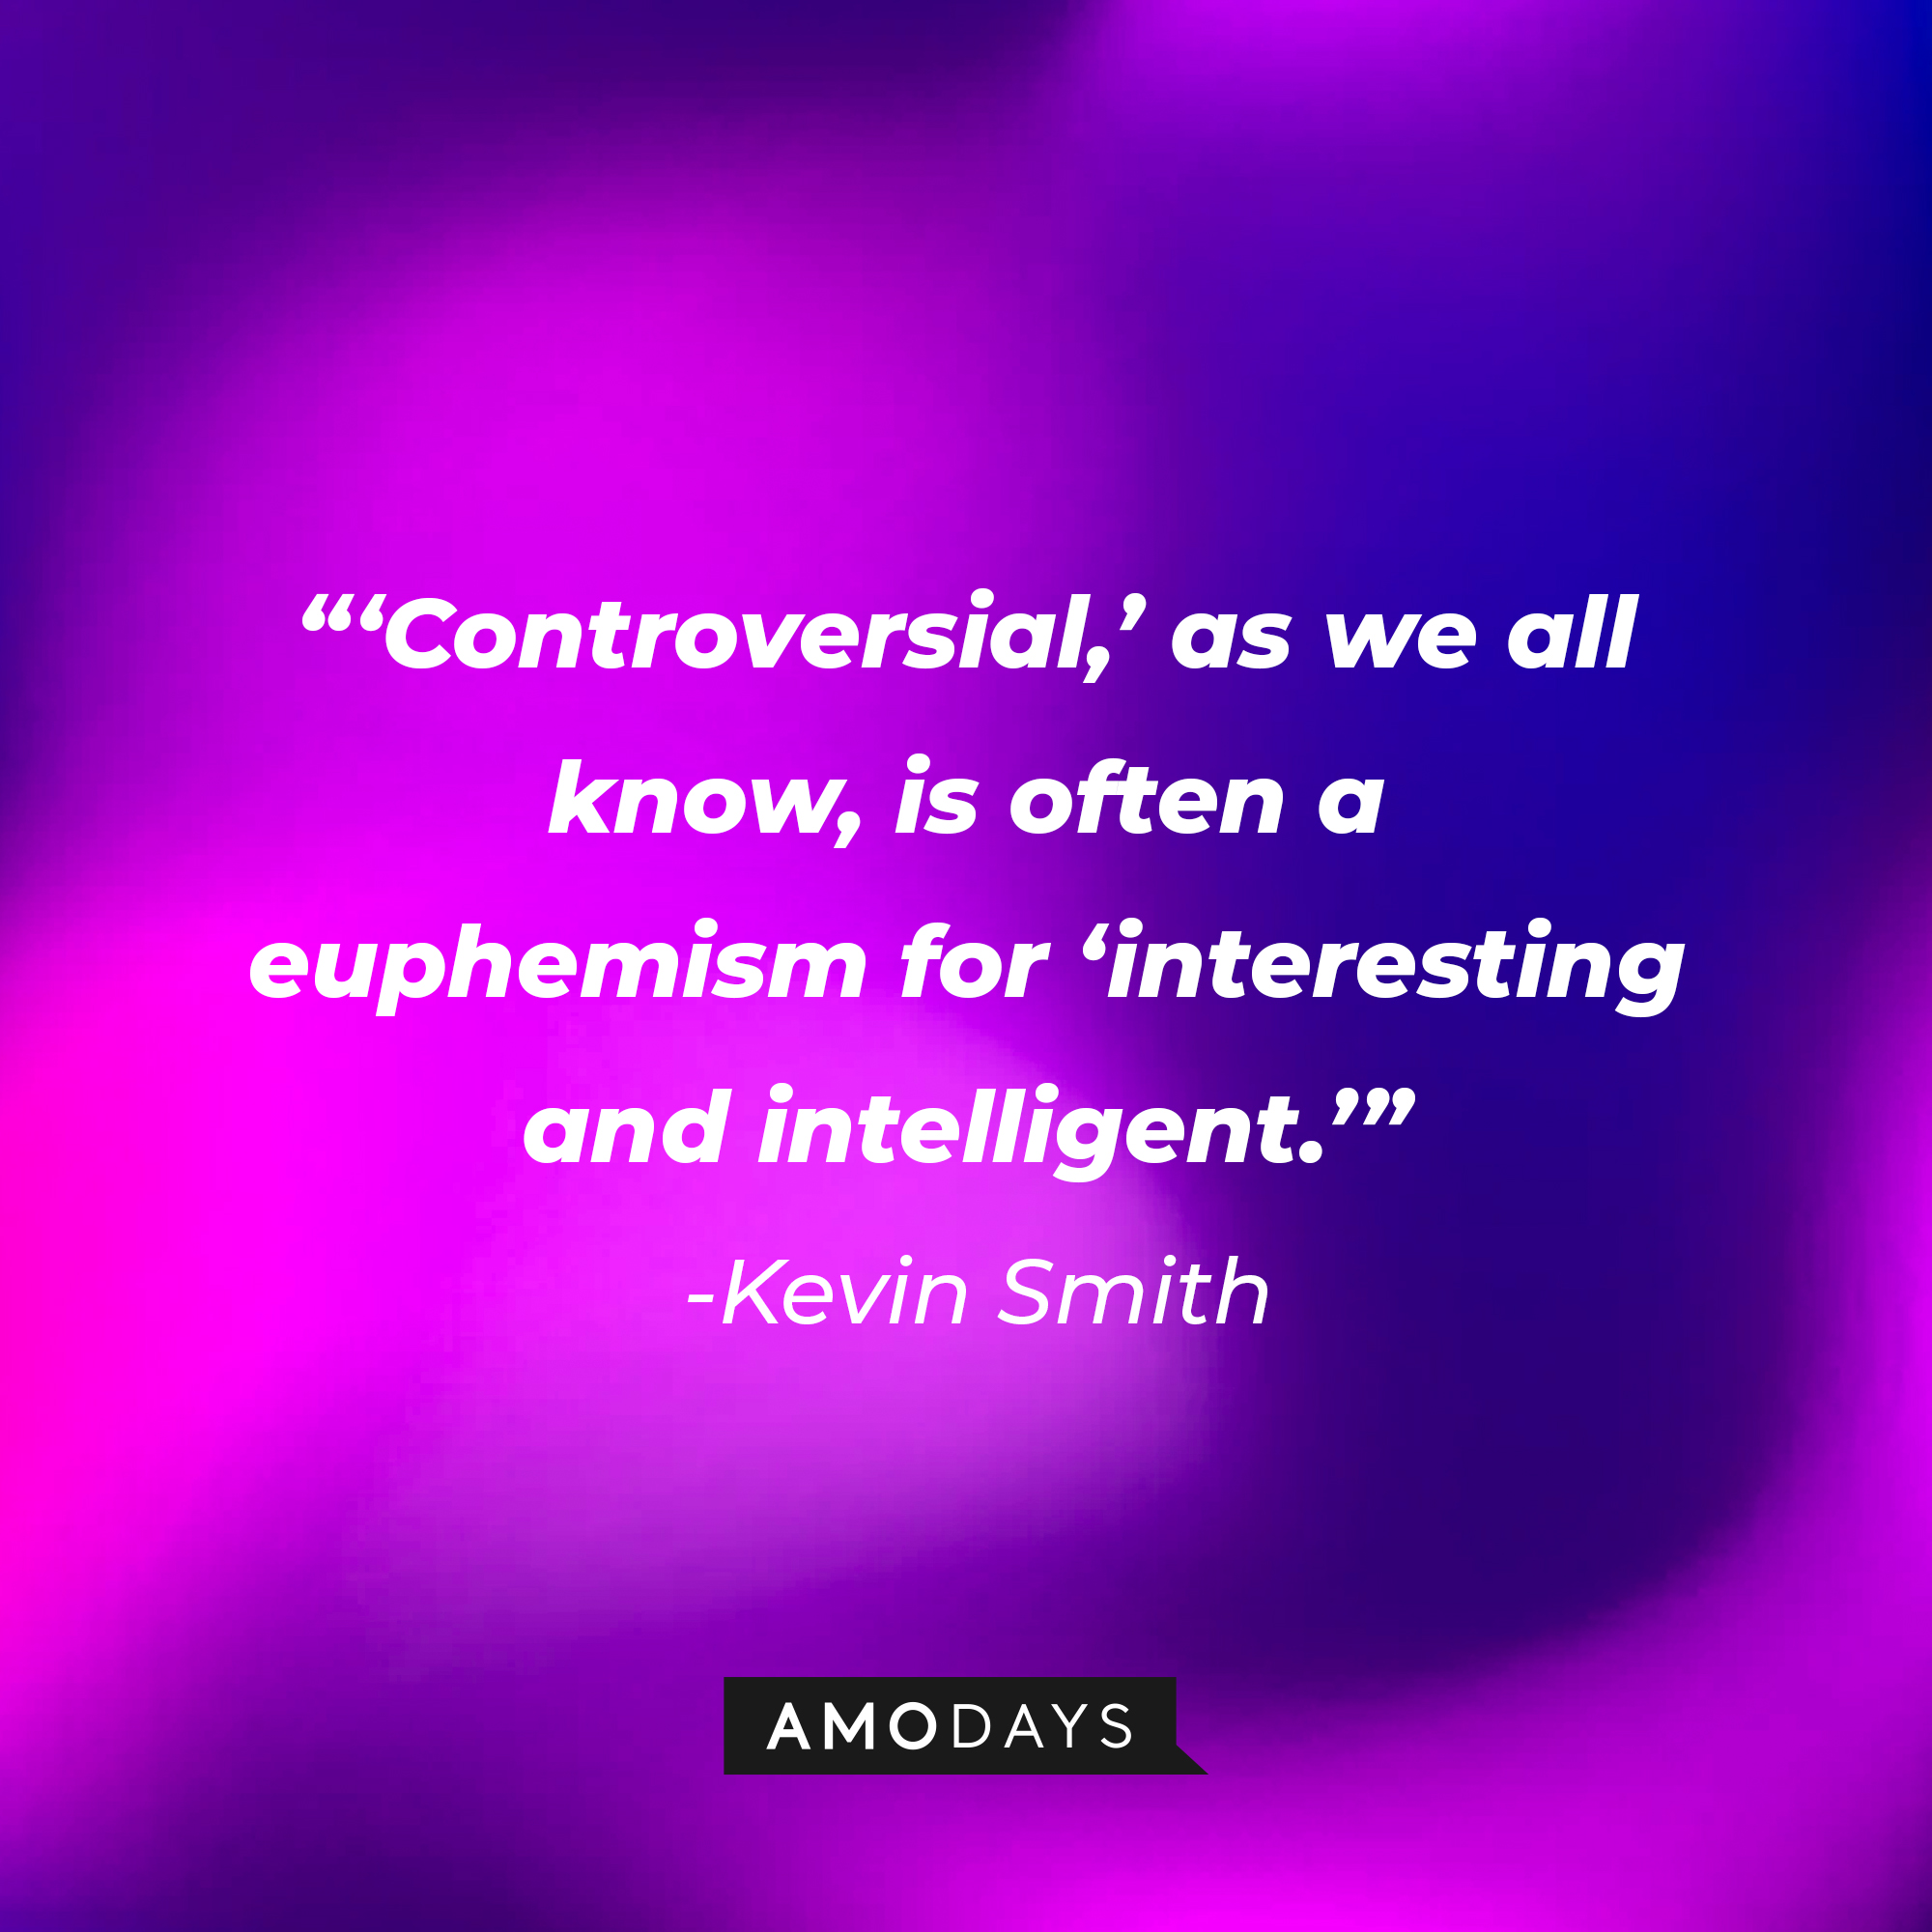 Kevin Smith’s quote: “'Controversial’ as we all know, is often a euphemism for ‘interesting and intelligent.” | Source: AmoDays